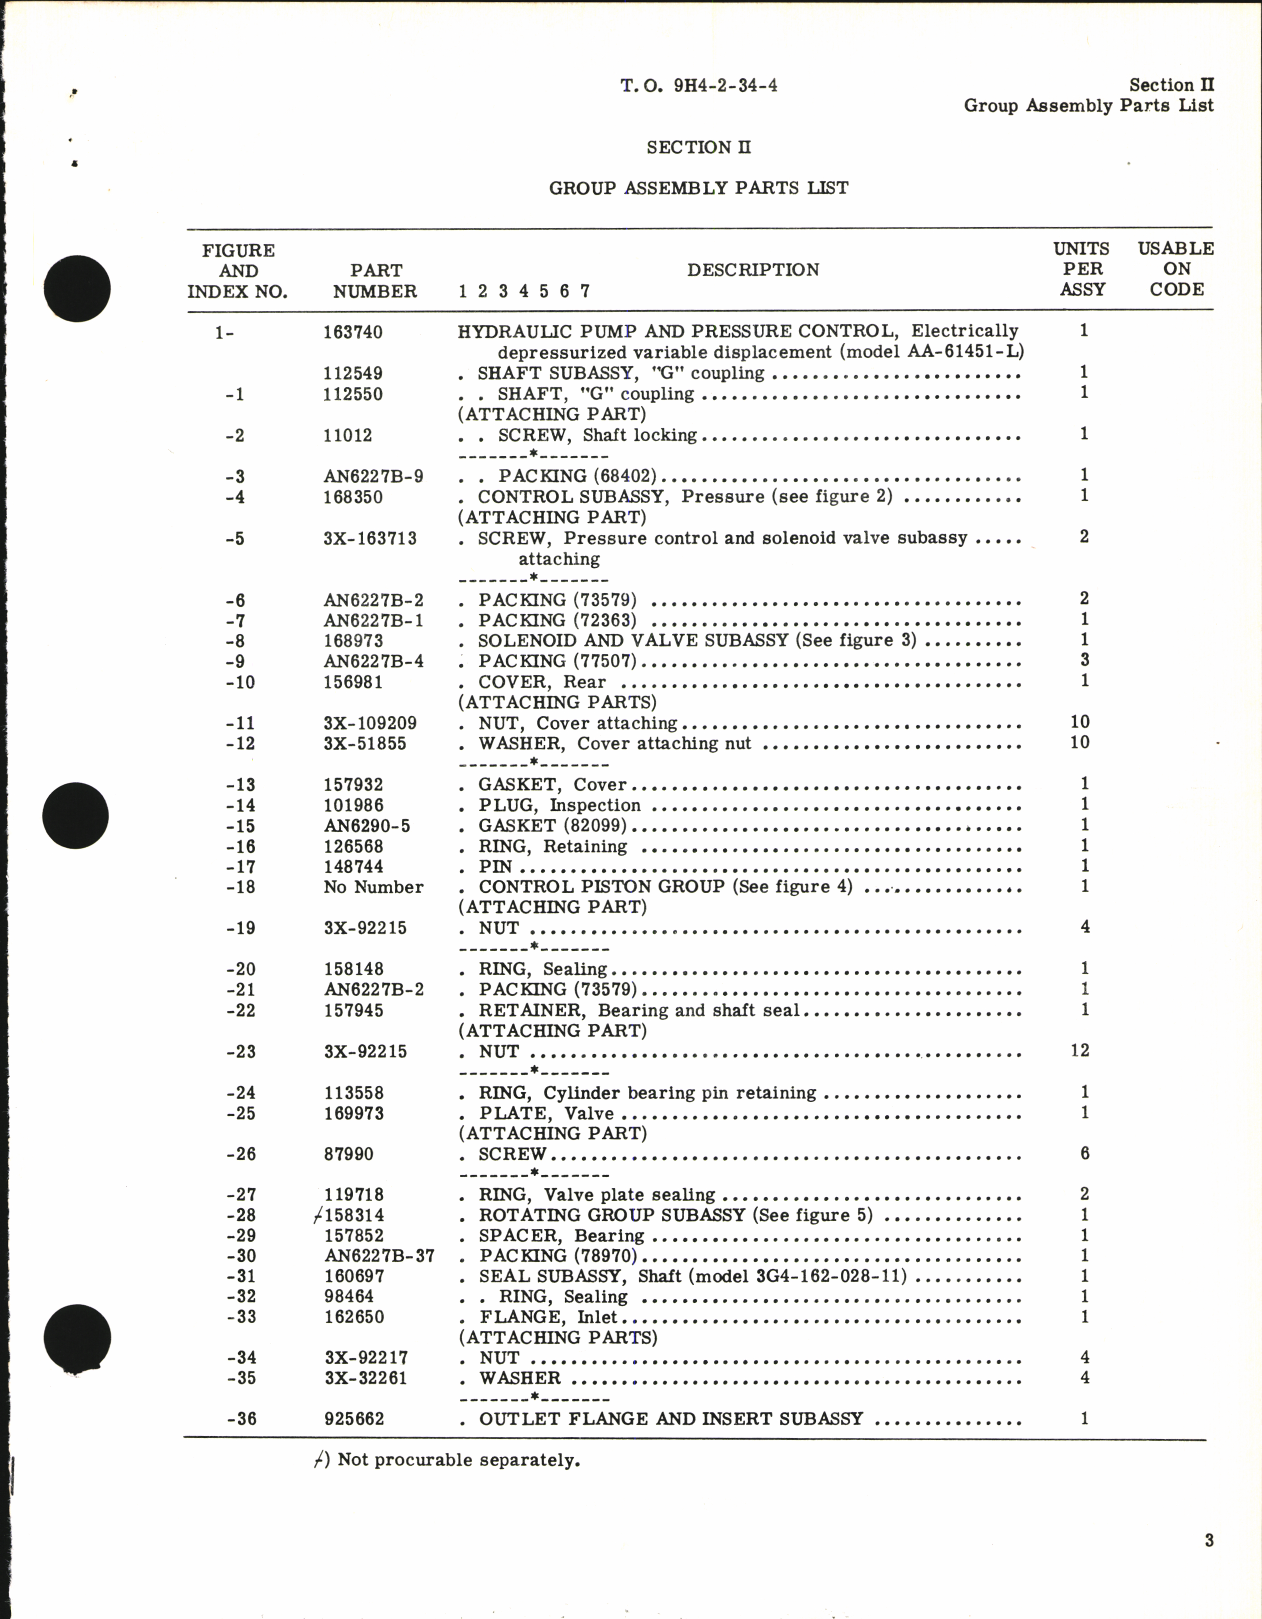 Sample page 5 from AirCorps Library document: Illustrated Parts Breakdown for Electrically Depressurized Variable Displacement Hydraulic Pumps AA-61250 Series